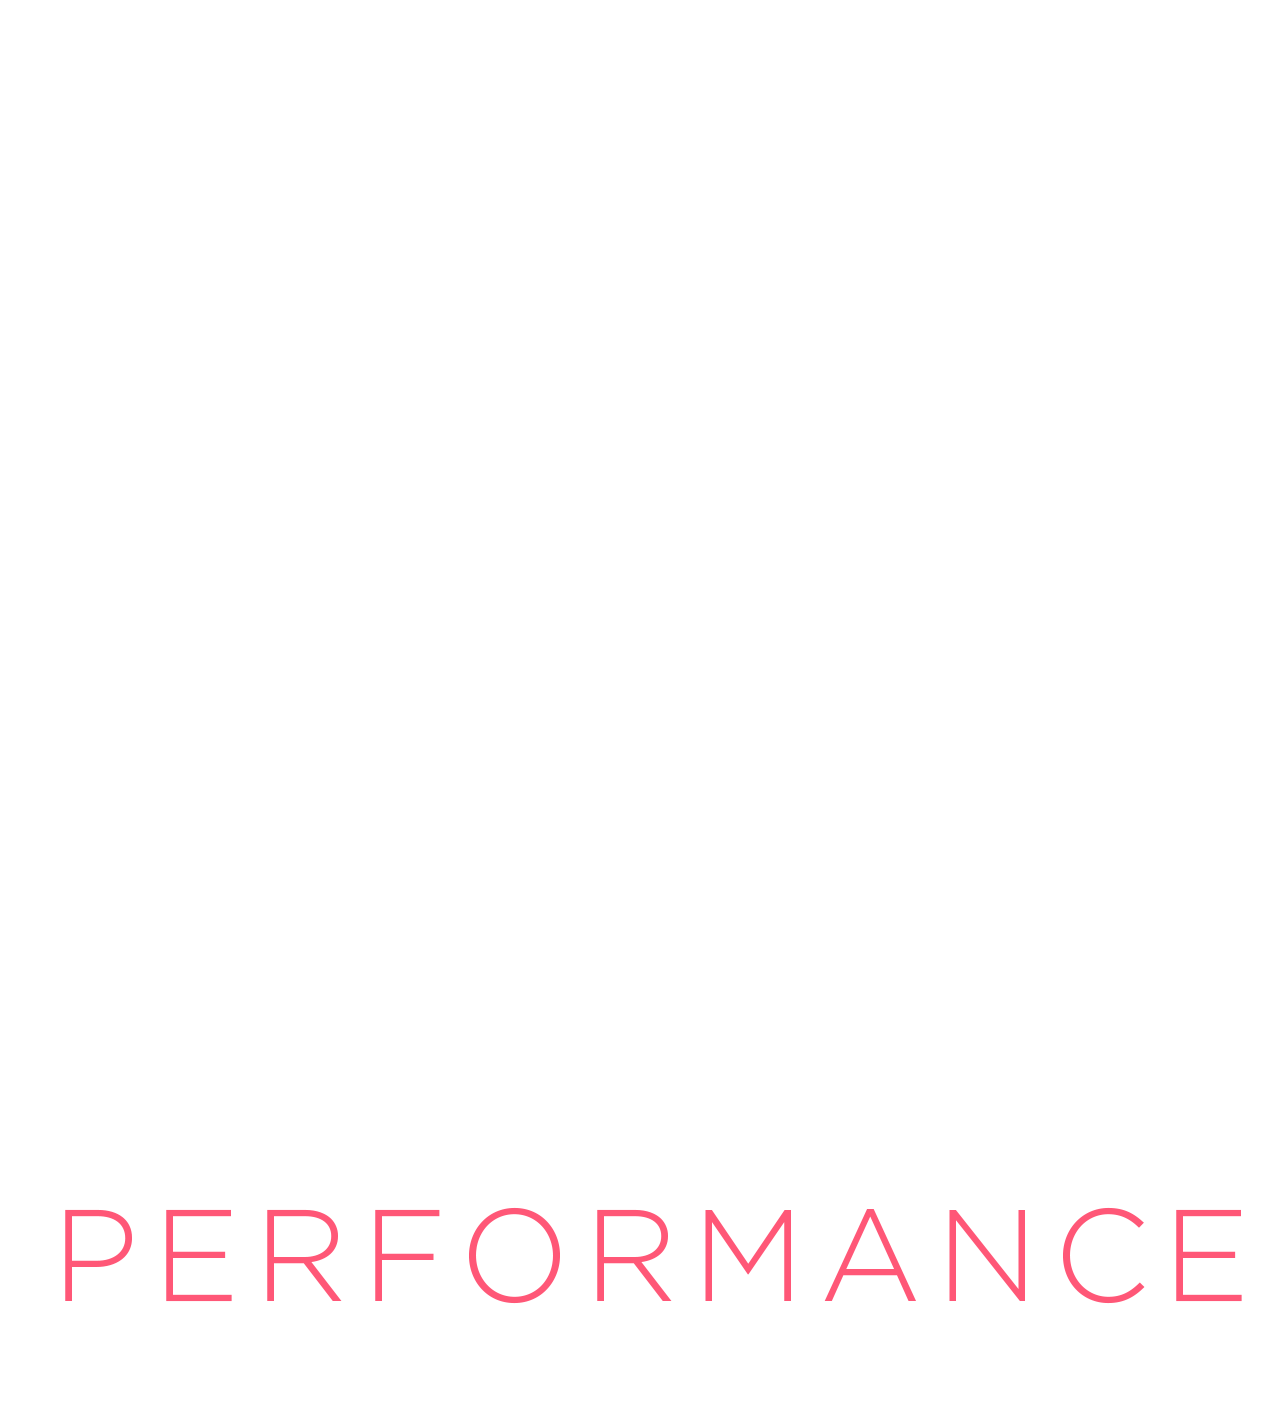 The One Performance